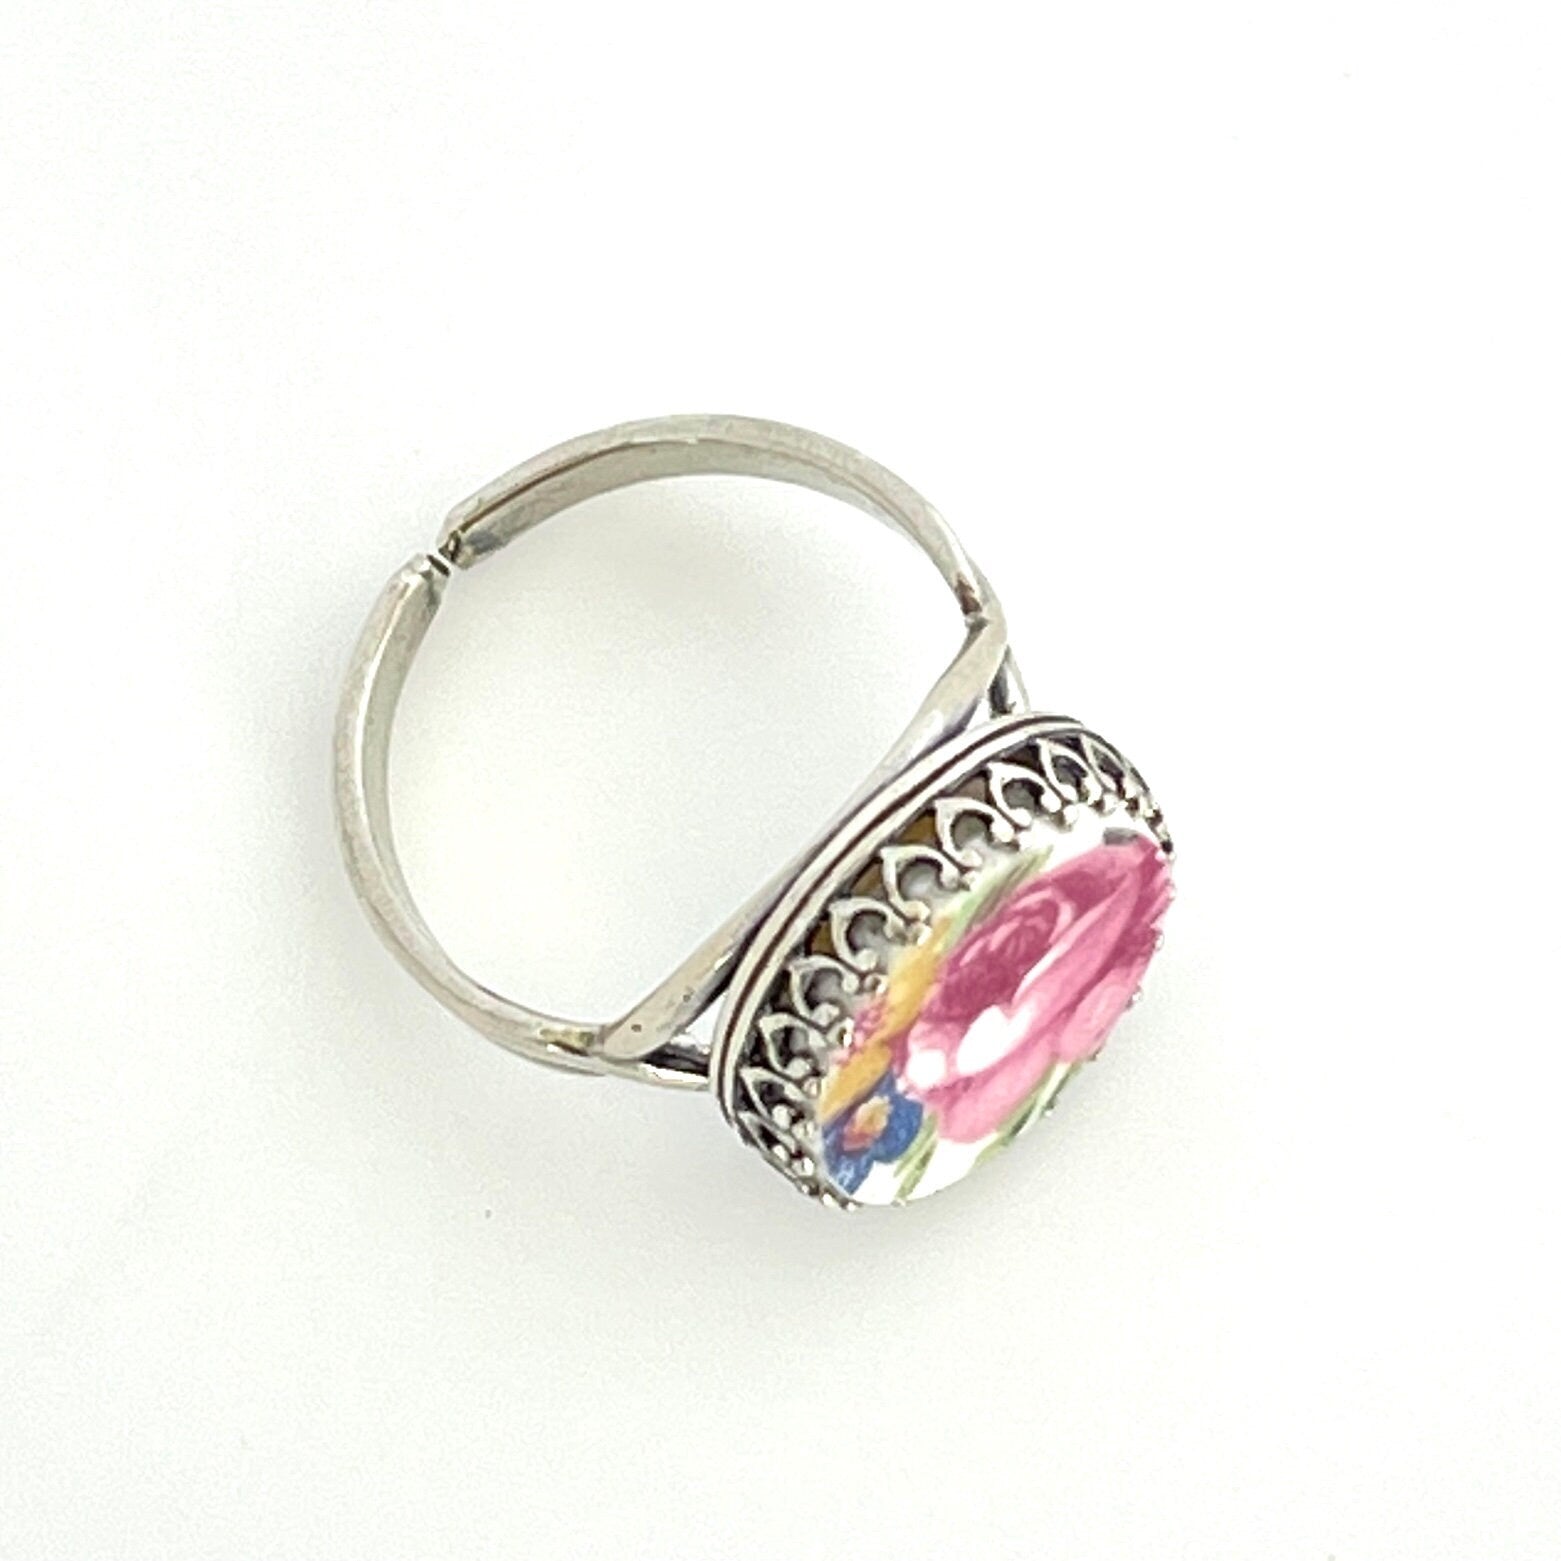 Pink Rose China Ring, Shabby Chic Silver Ring, Broken China Jewelry, Unique Gifts for Women, Vintage American China Jewelry